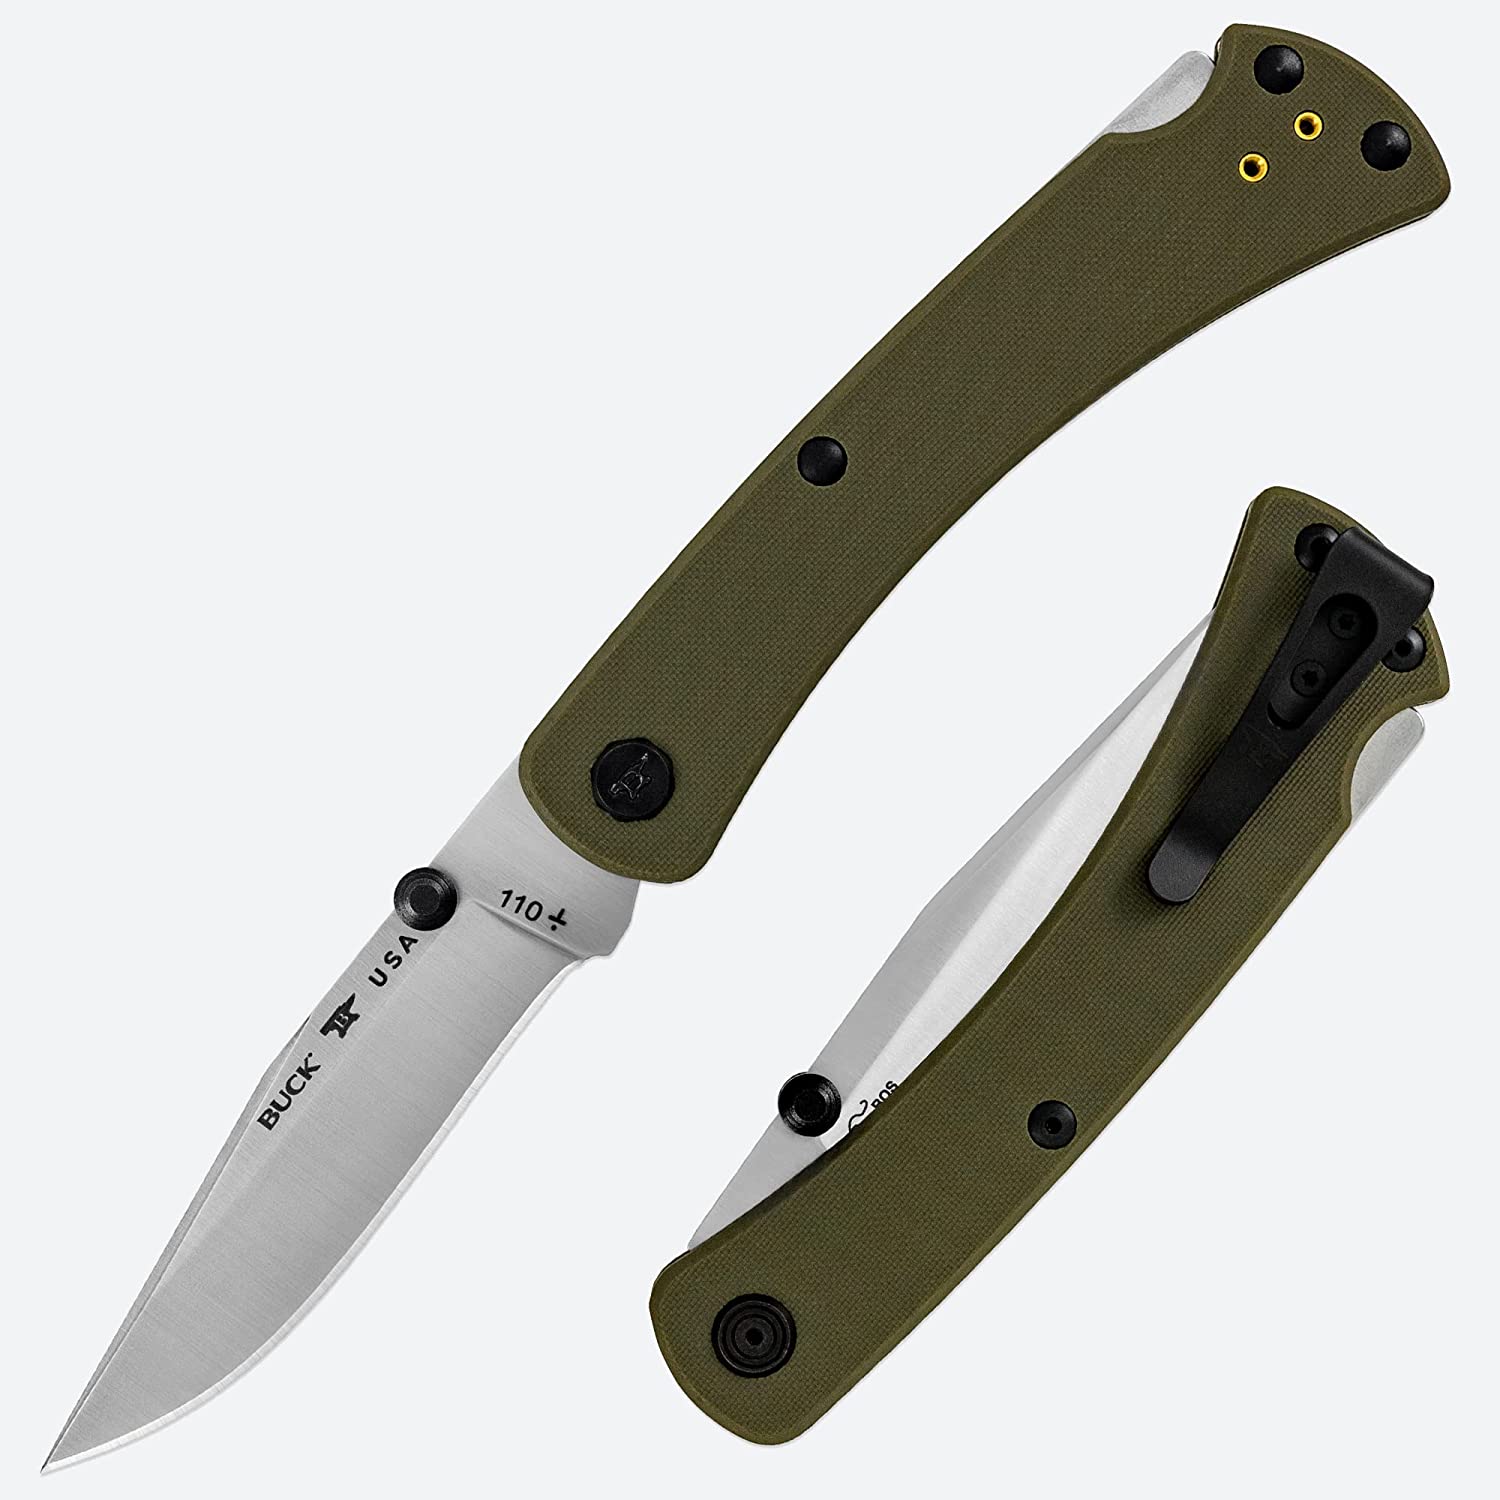 Buck Knives 110 Slim Pro TRX Lock-back Pocket Knife with G10 Handle, Thumb Studs and Removable/Reversible Deep Carry Pocket Clip, 3-3/4" S30V Blade (Green)